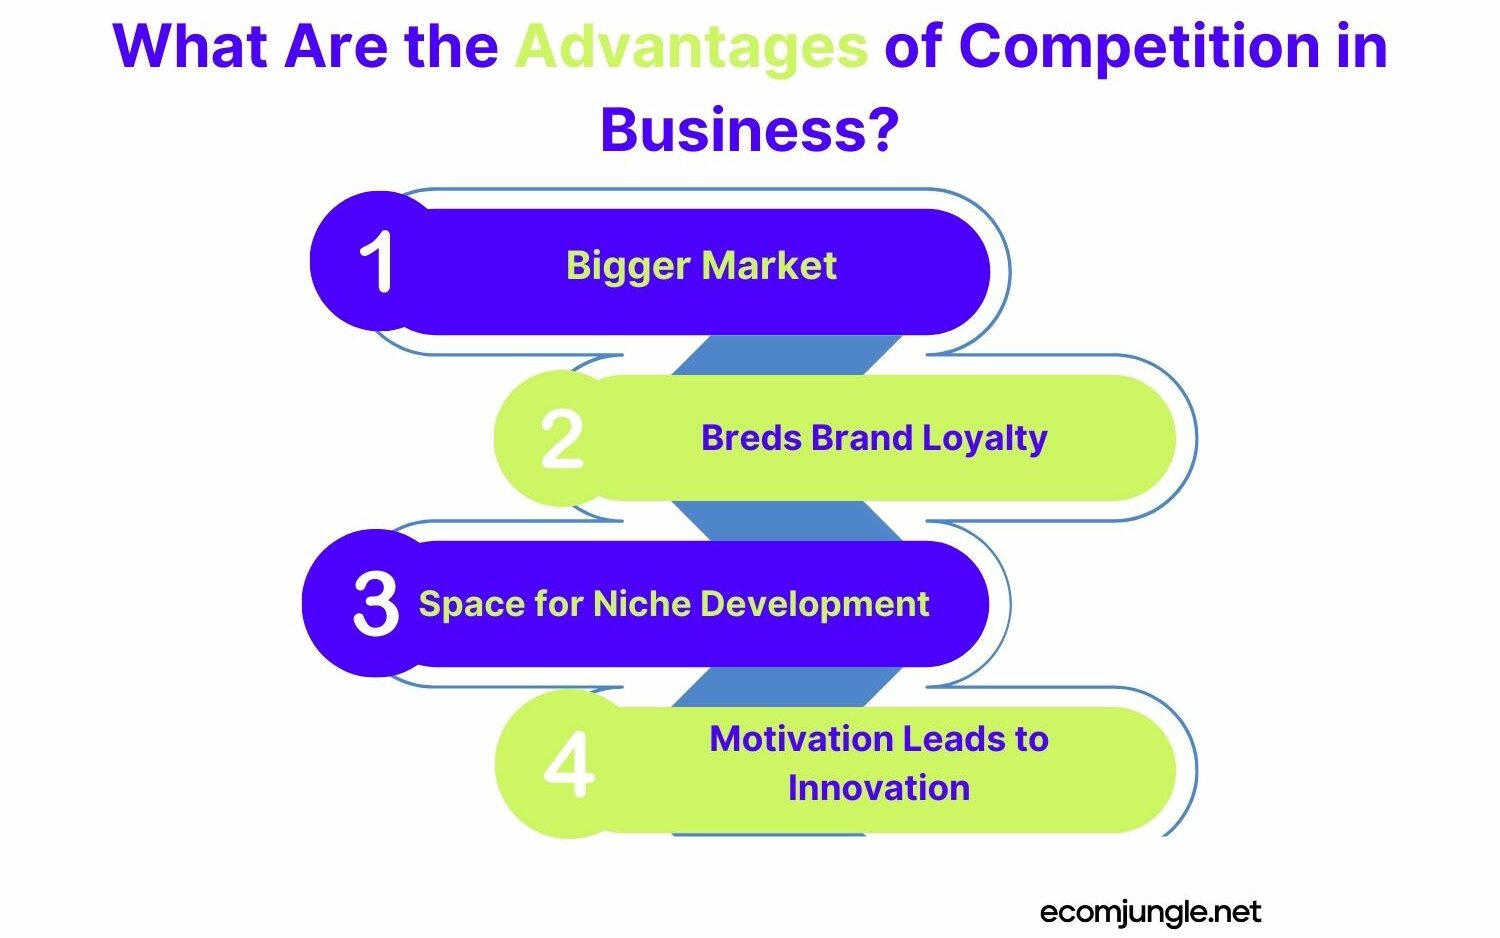 Competition in business can have numerous potential benefits.